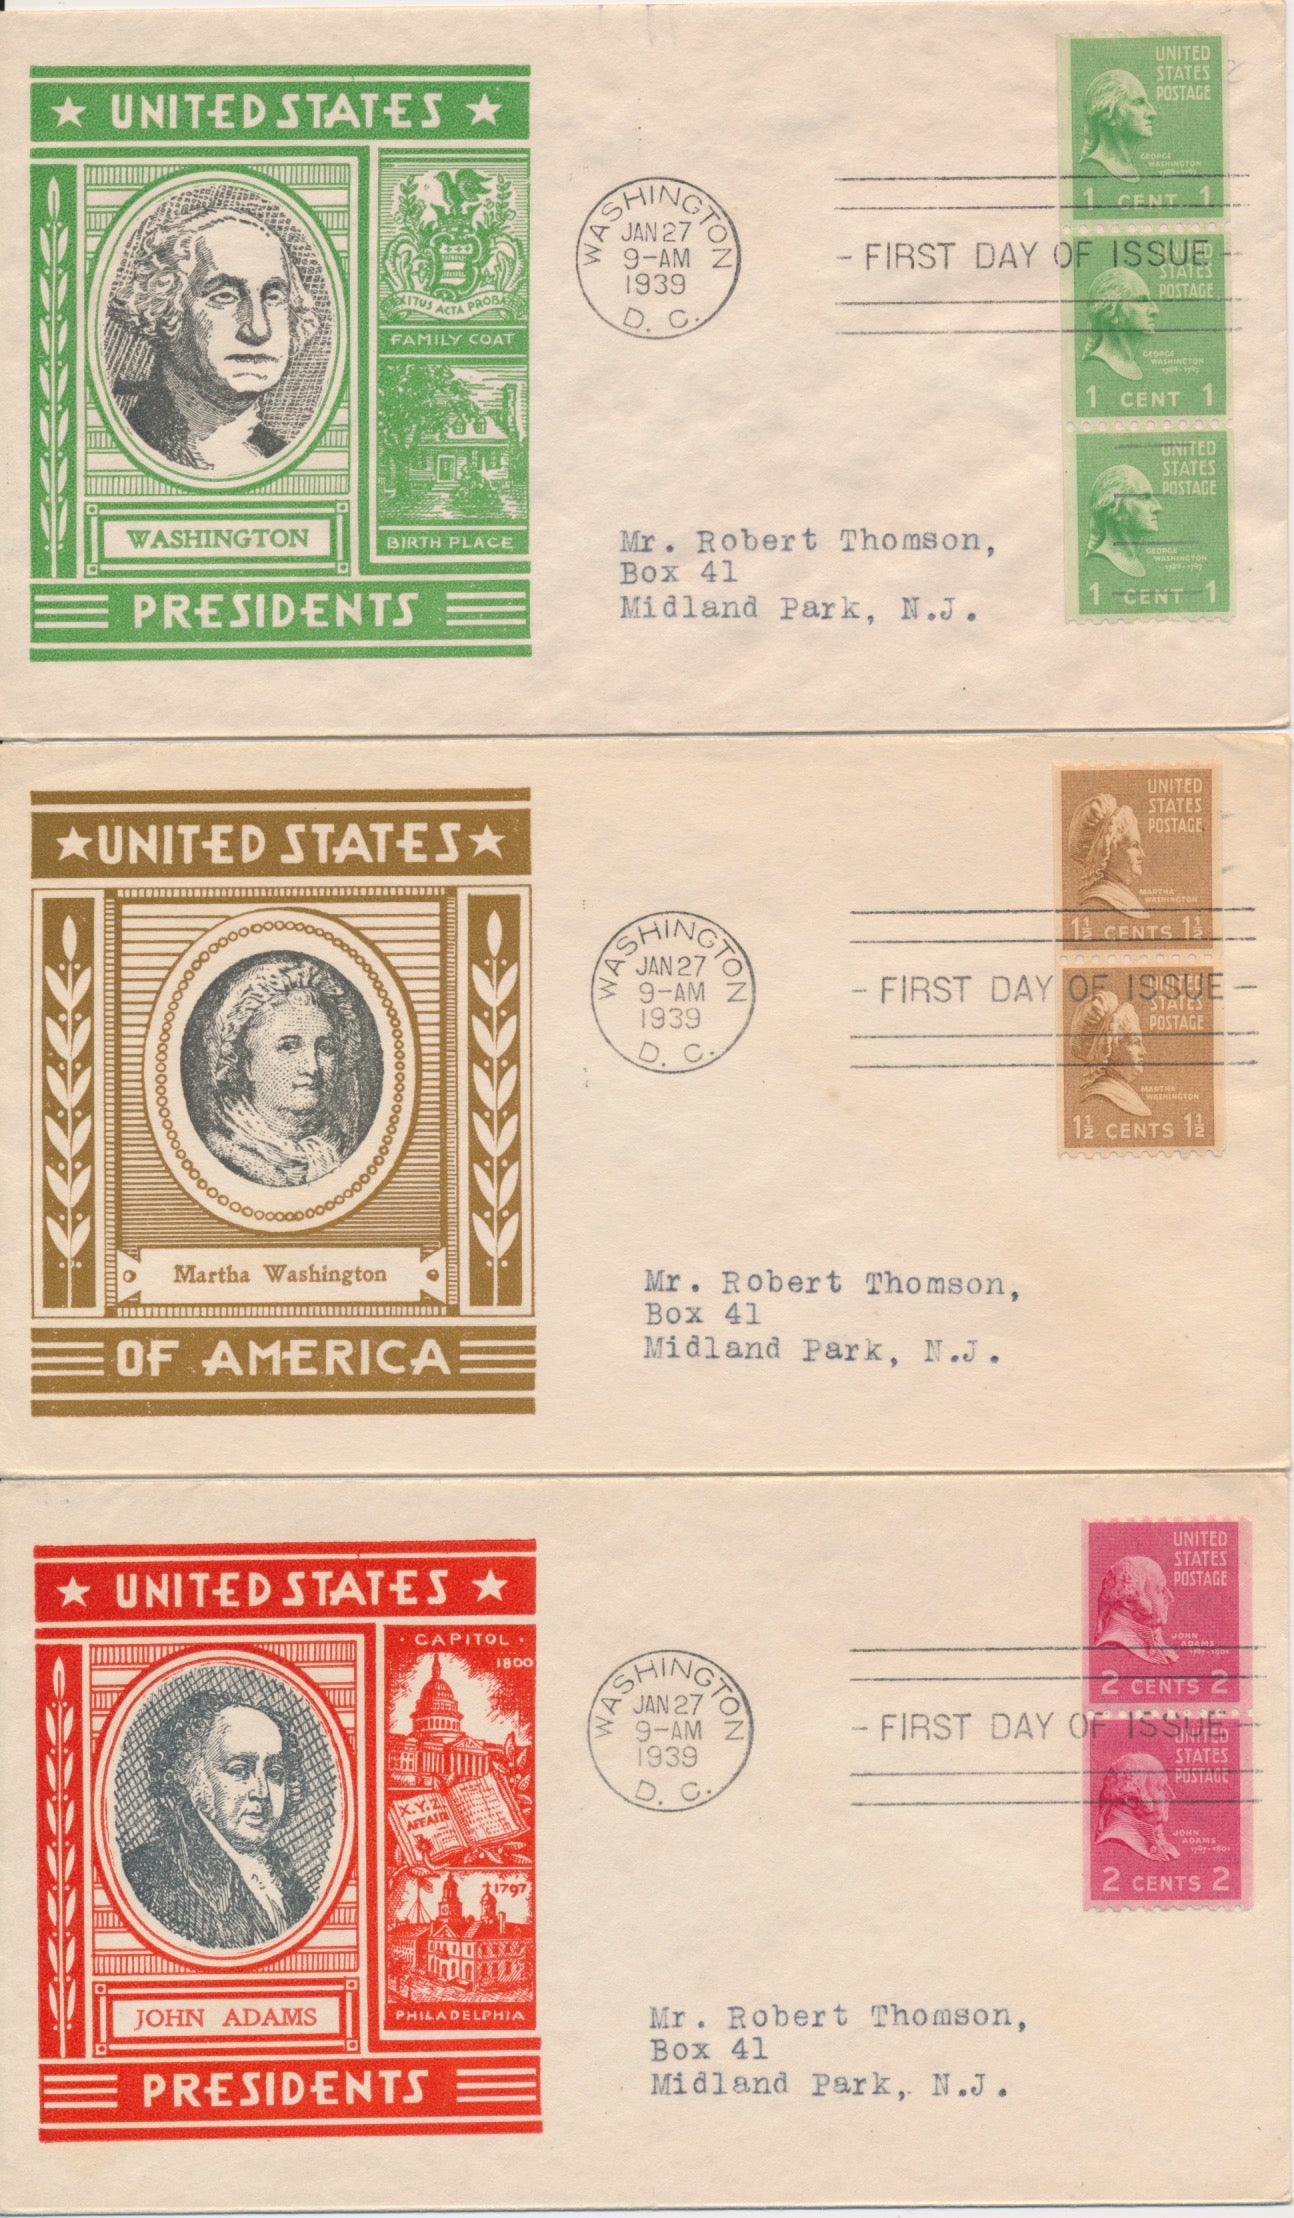 #848-851 Presidential coils 1/27/1939 set of 4 Staehle cachet First Day covers